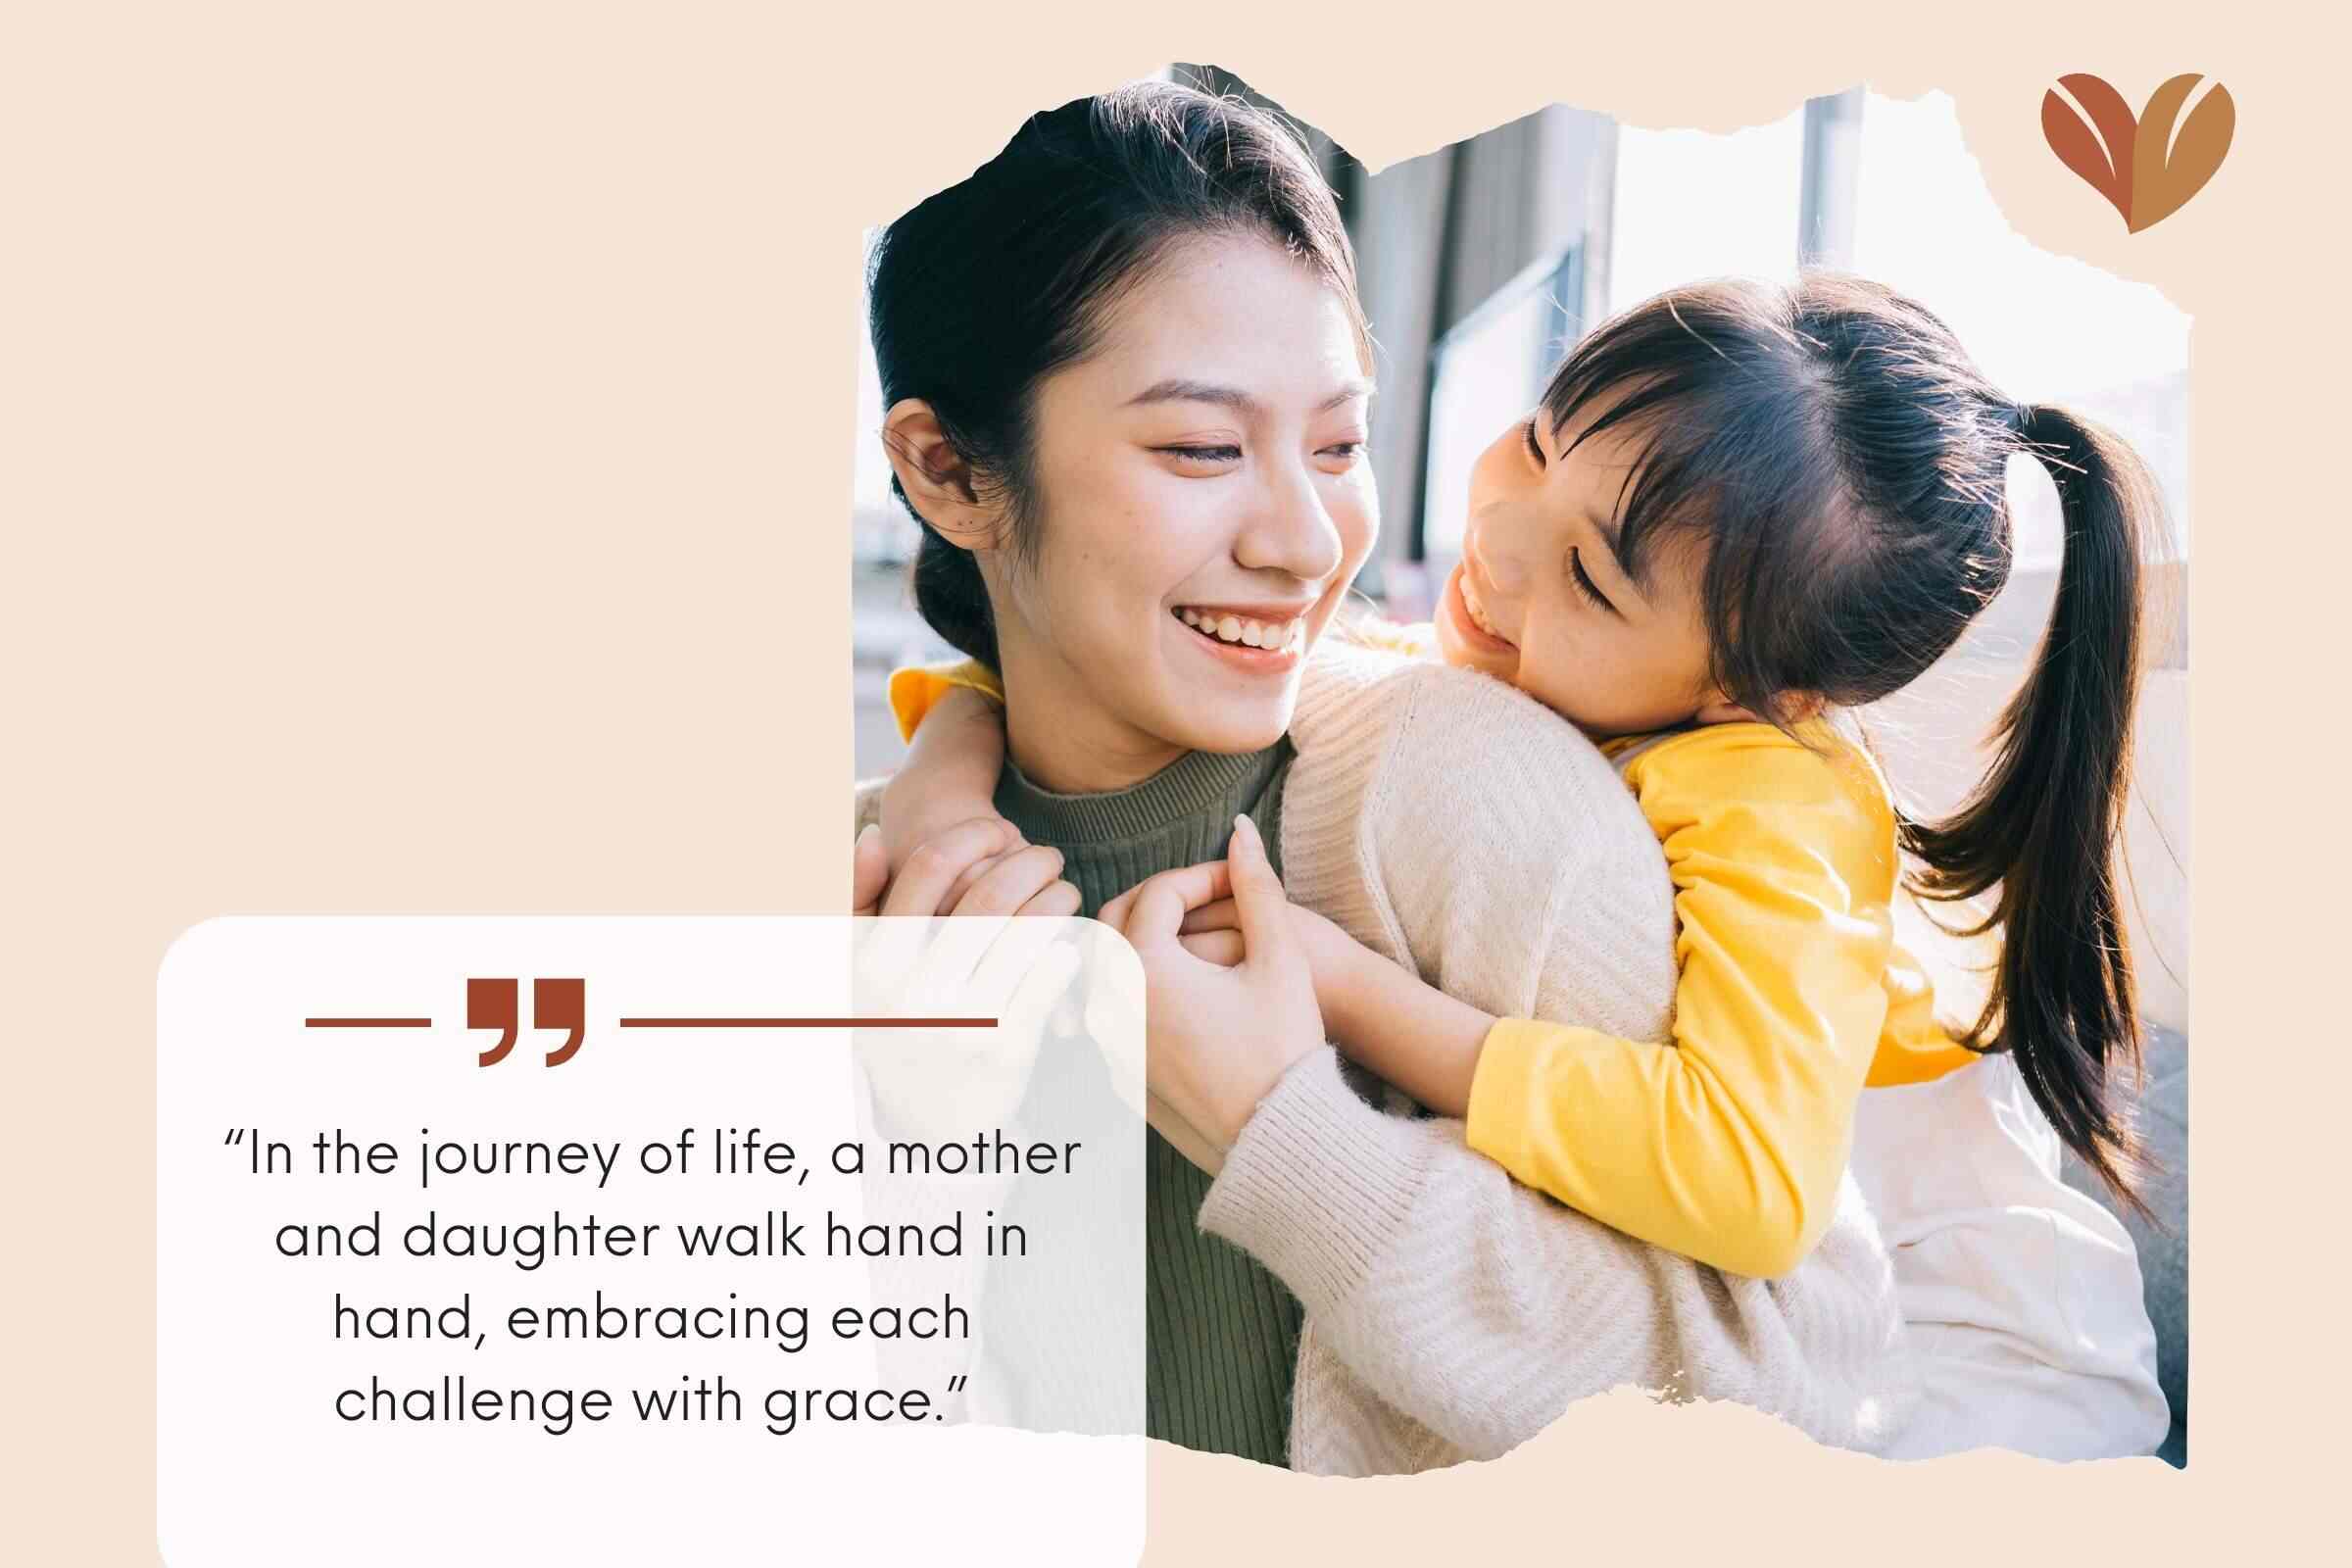 Inspirational Touching Mother-Daughter Quotes to Uplift and Inspire